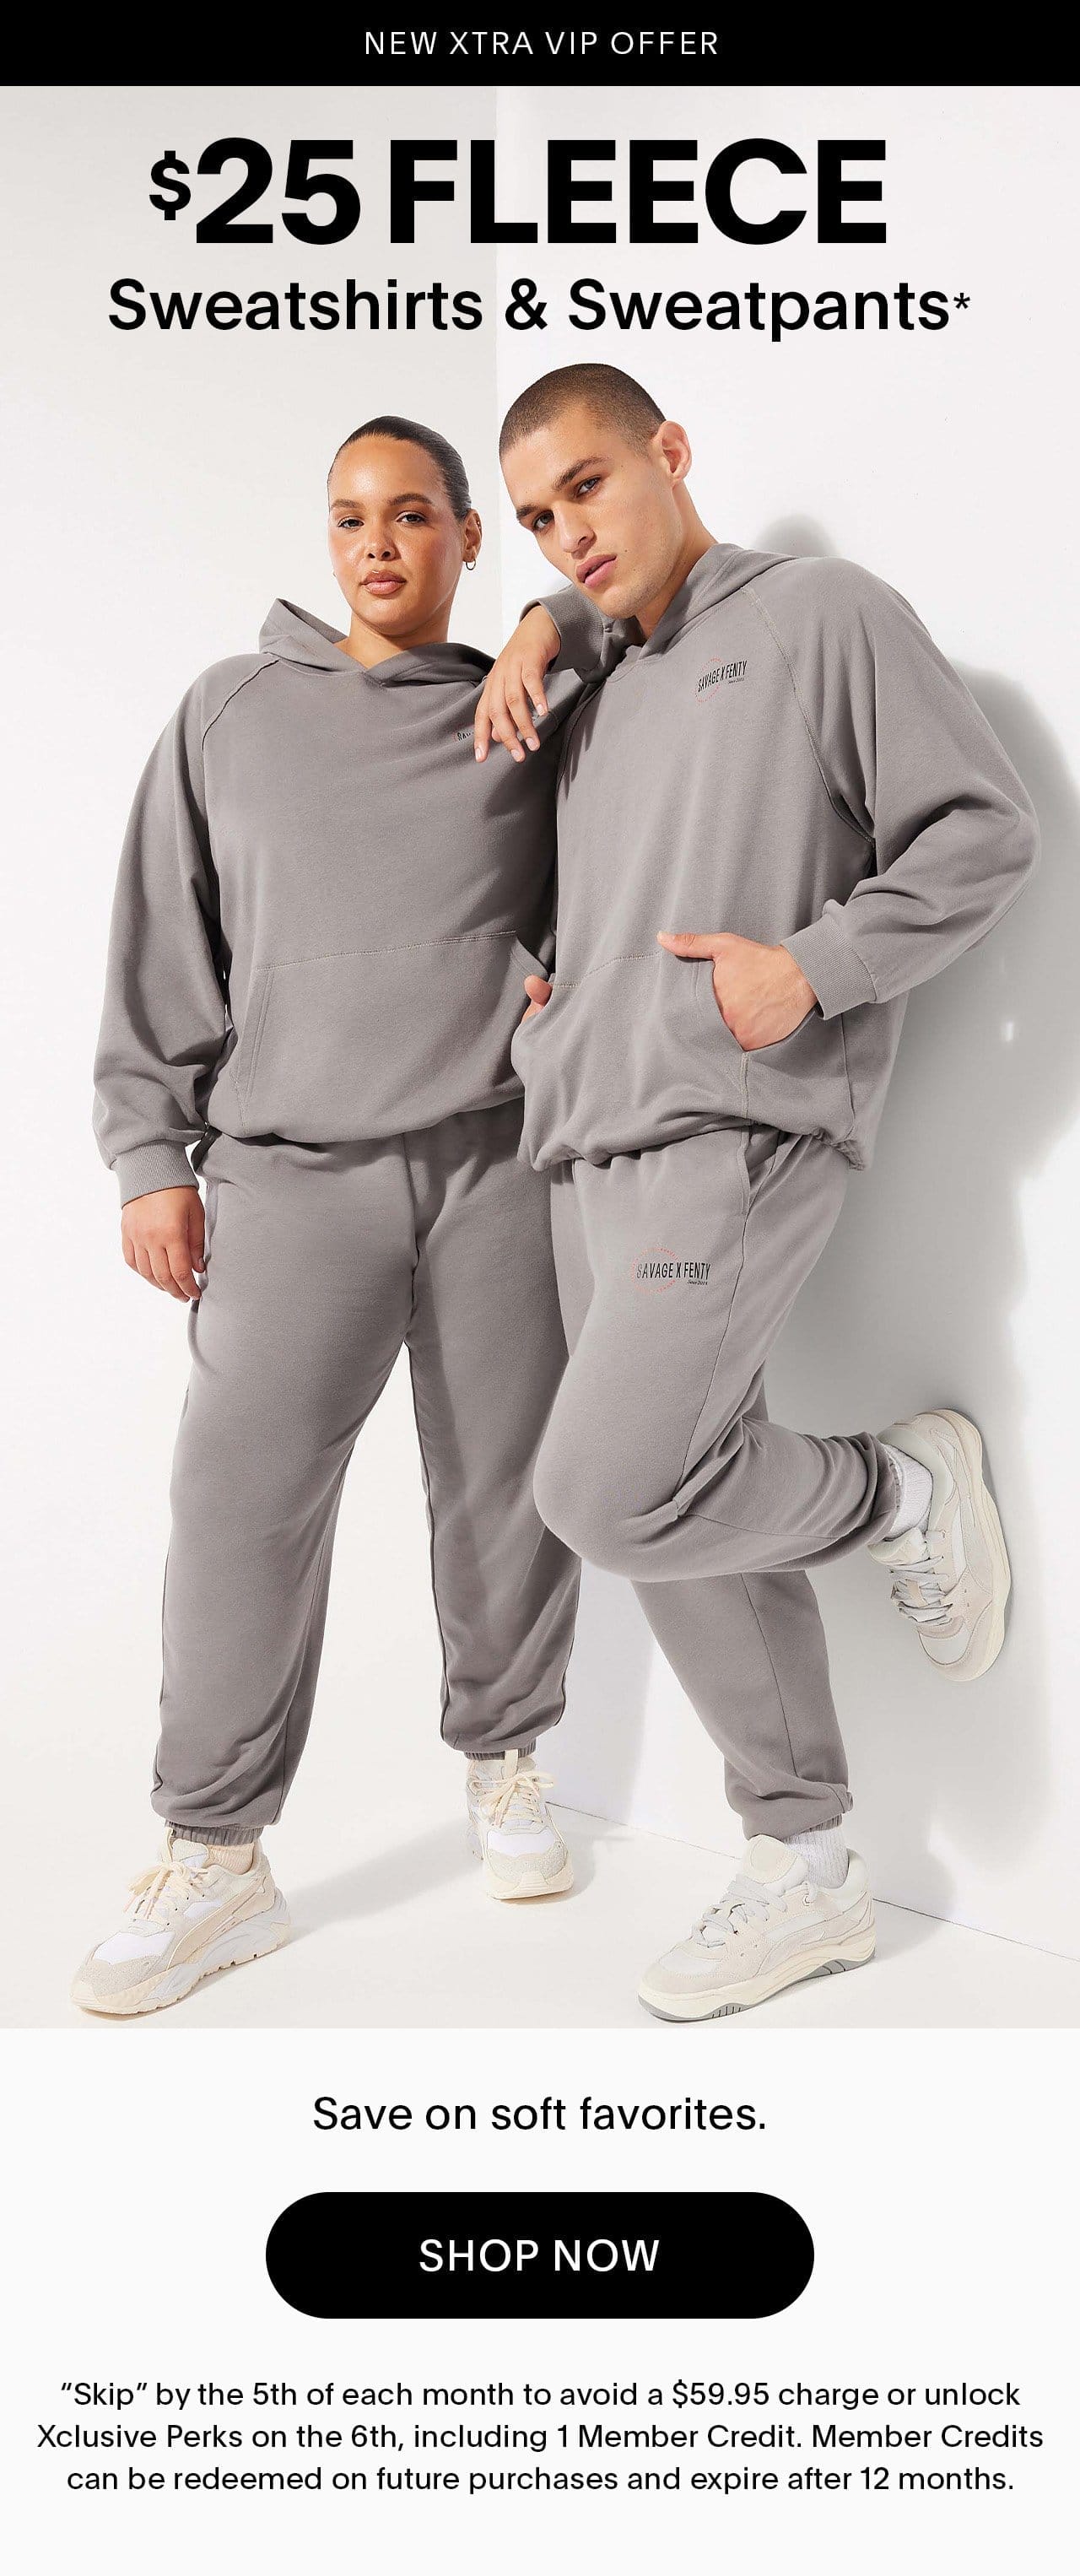 New Xtra VIP Offer \\$25 Fleece Sweatshirts and Sweatpants* Save on soft favorites. 